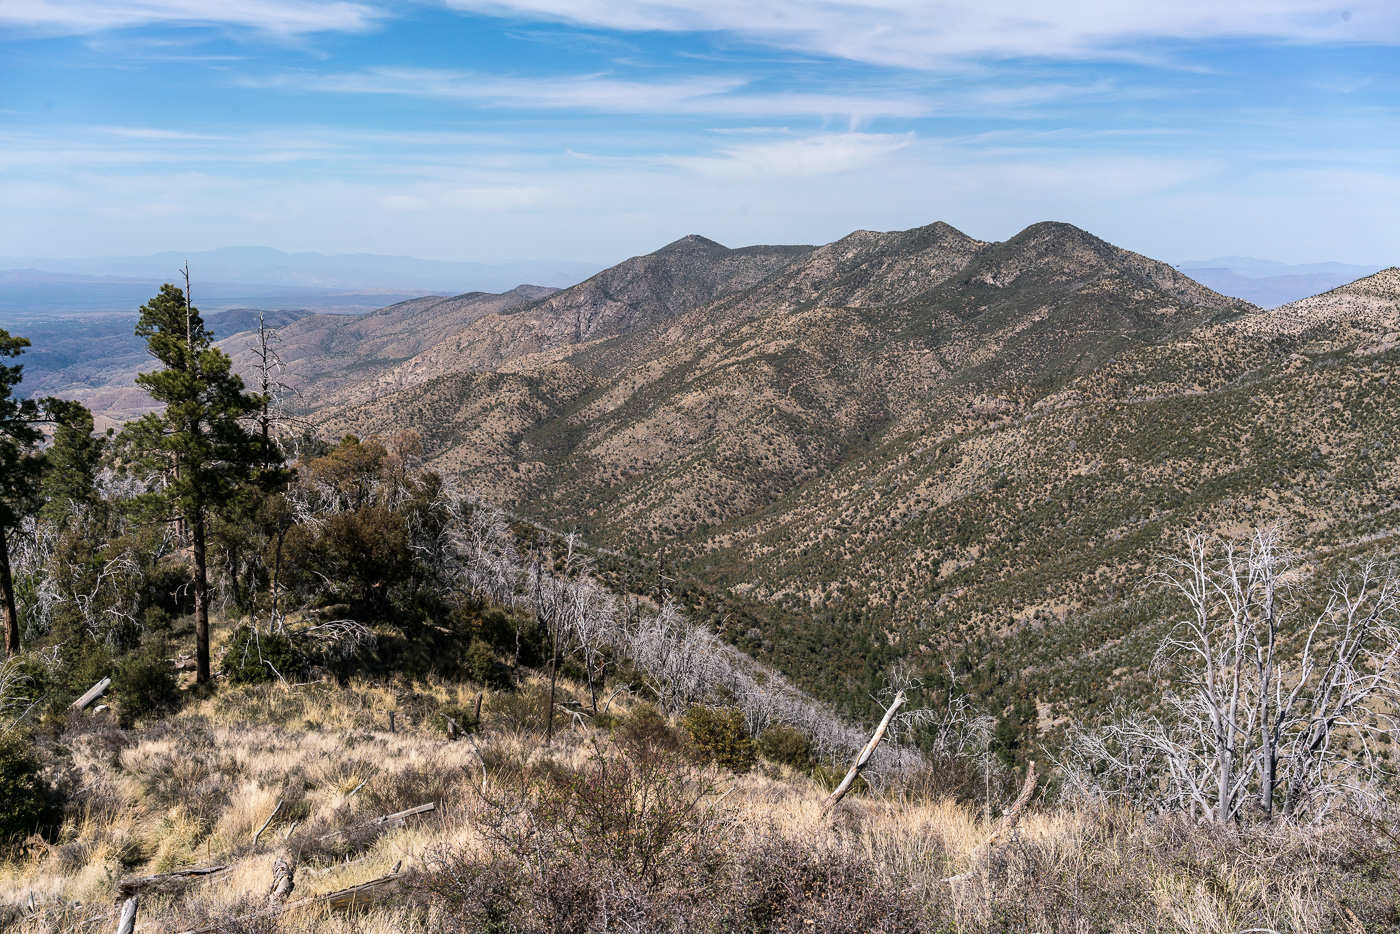 Oracle Ridge and Rice Peak from the Red Ridge Trail - the Catalina Camp Trail can be seen descending from Oracle Ridge towards its junction with the Red Ridge Trail. April 2017.